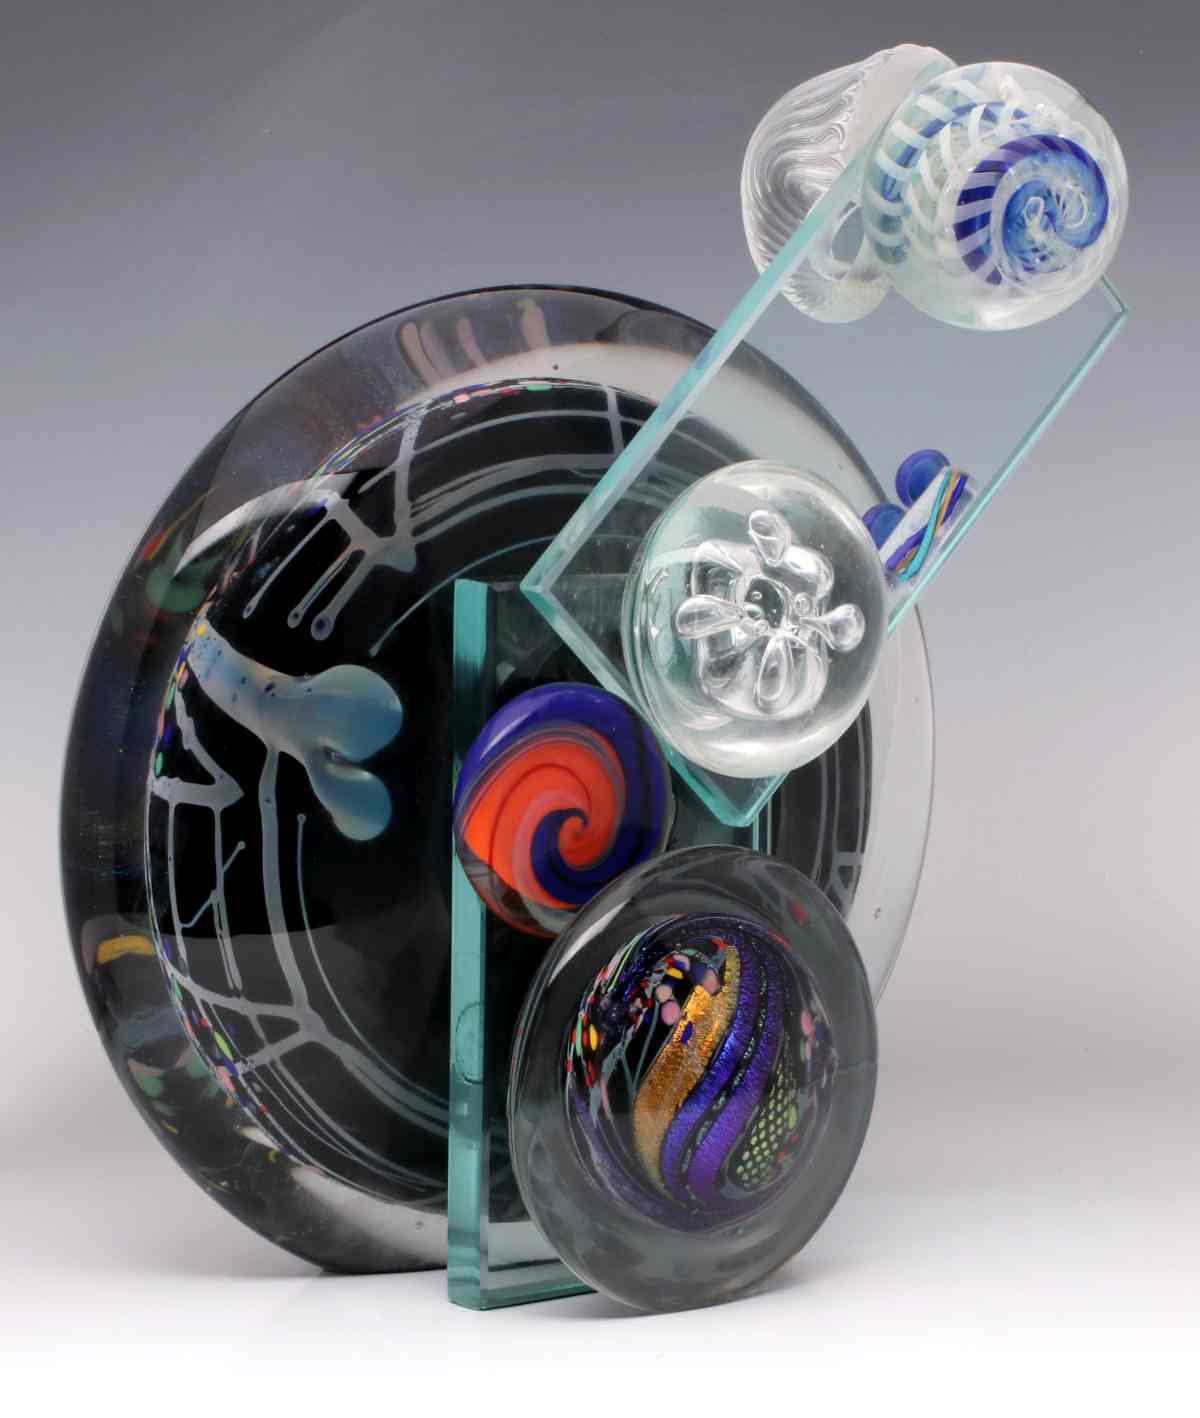 A LARGE AND COMPLEX ROLLIN KARG GLASS ASSEMBLAGE